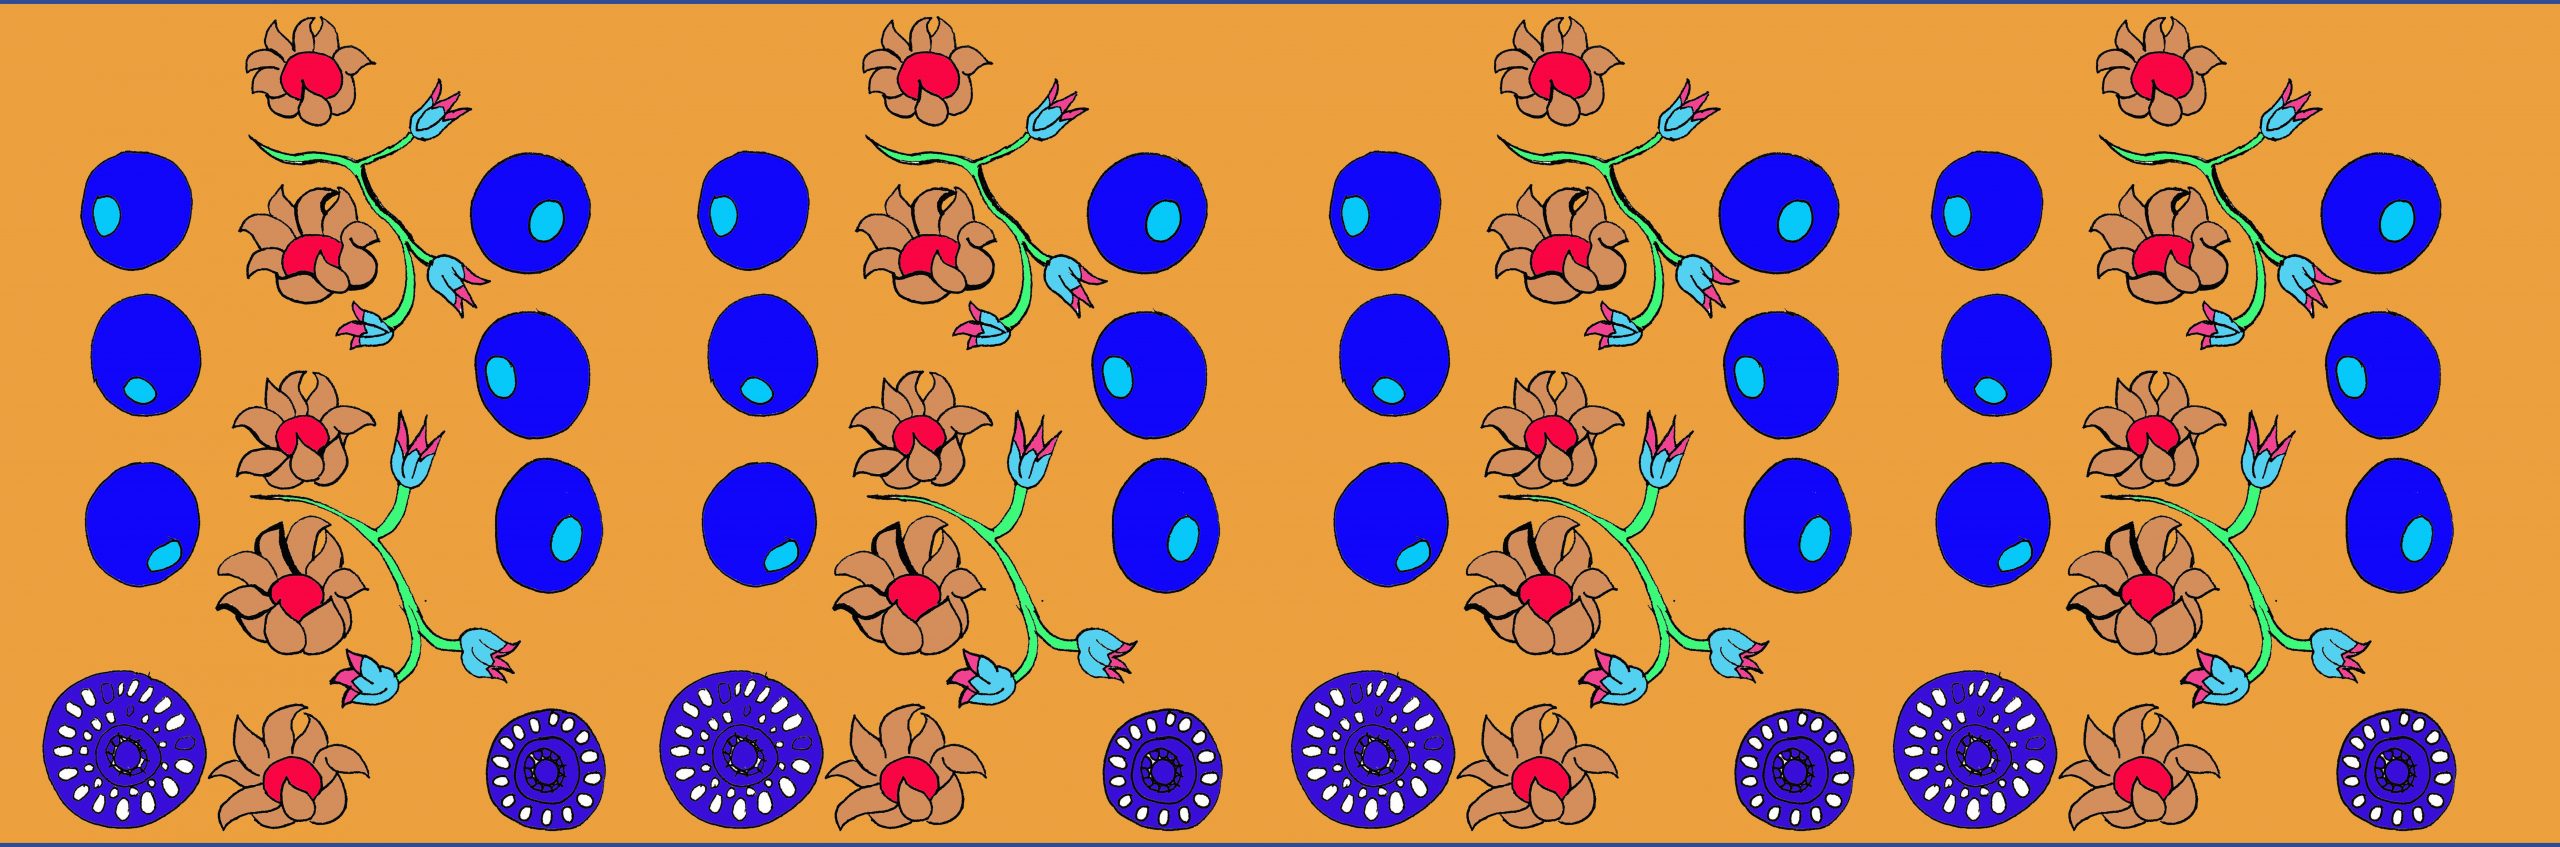 Brown flowers and blue round motifs against brown background